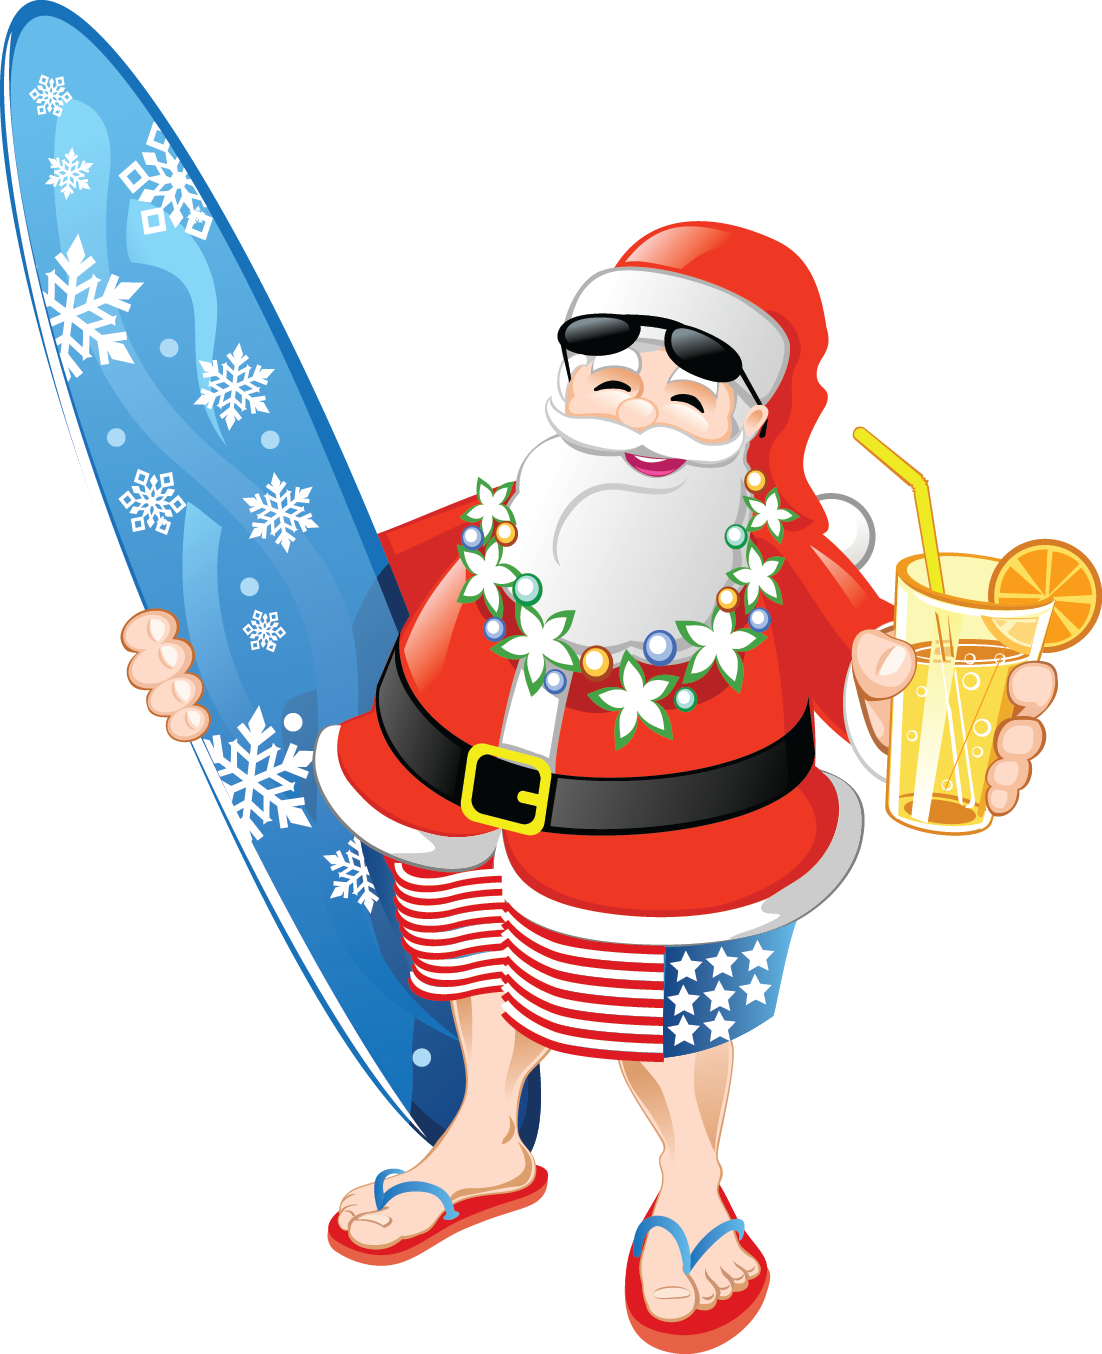 Christmas In July - Christmas In July Santa Claus (1102x1354)